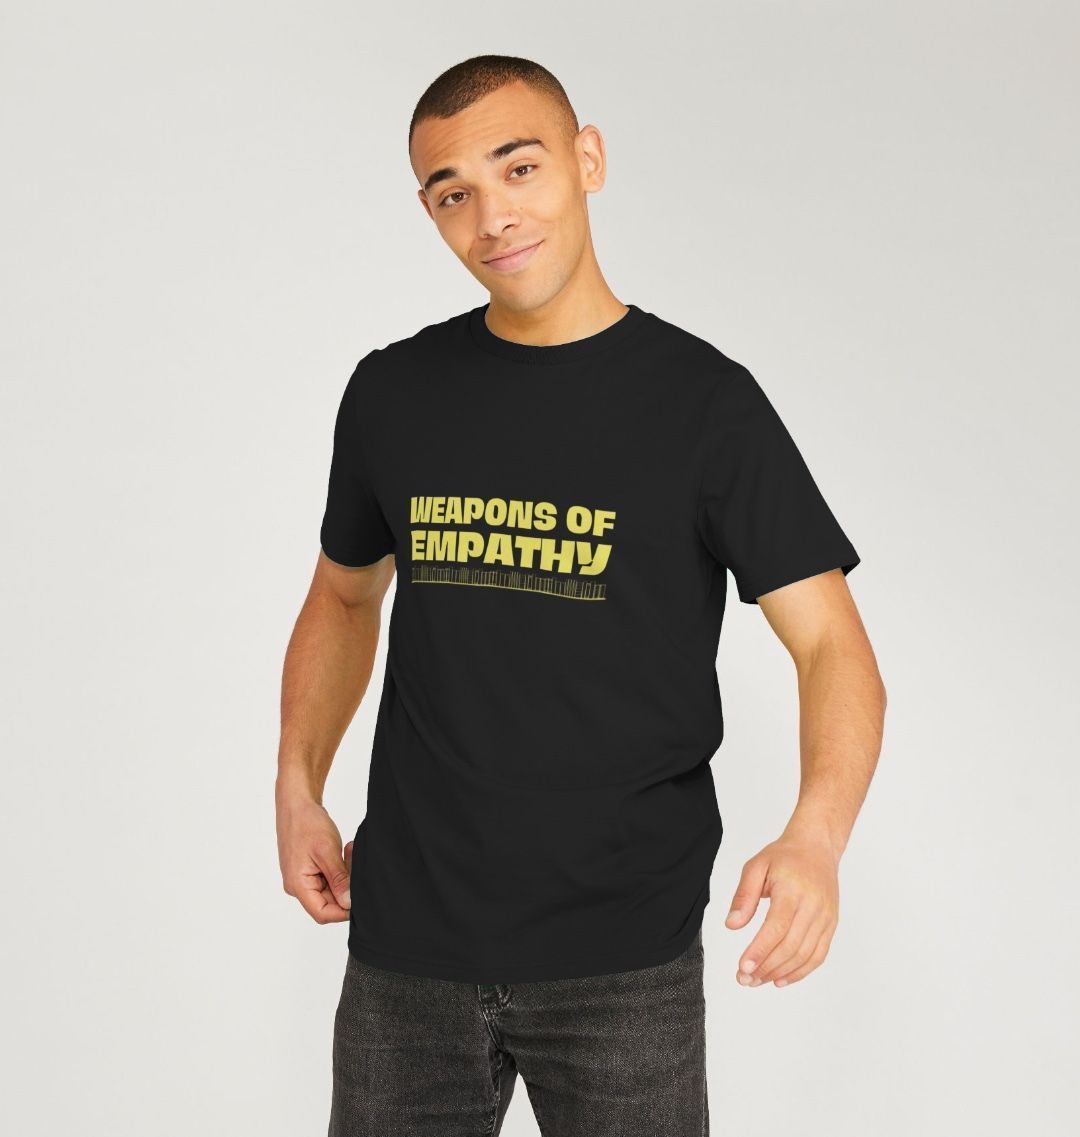 Weapons of Empathy T-Shirt